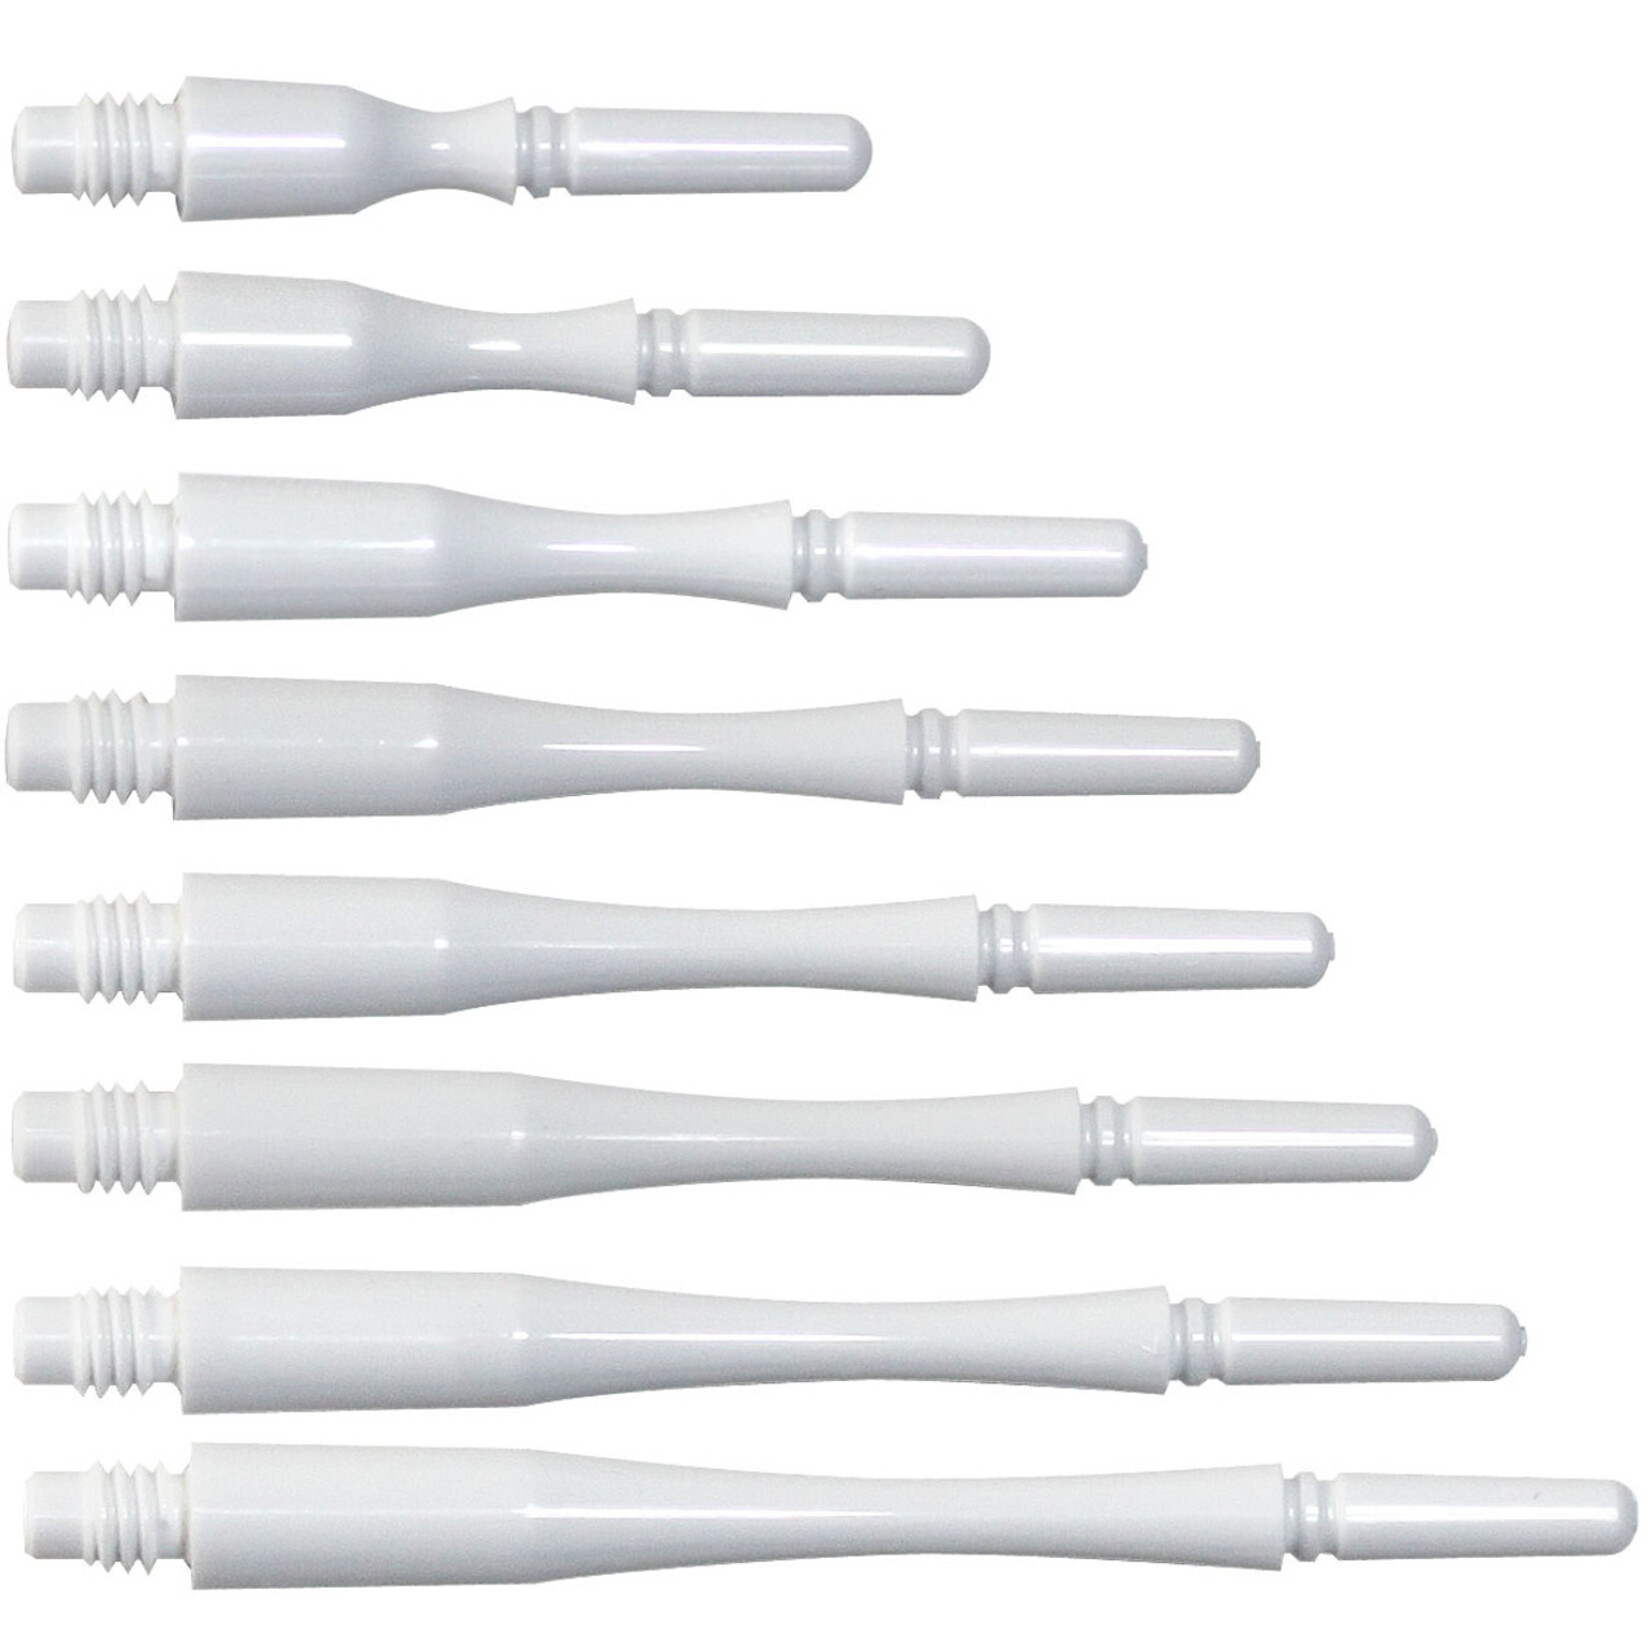 COSMO DARTS Cosmo Fit Gear Hybrid Locked White Dart Shafts